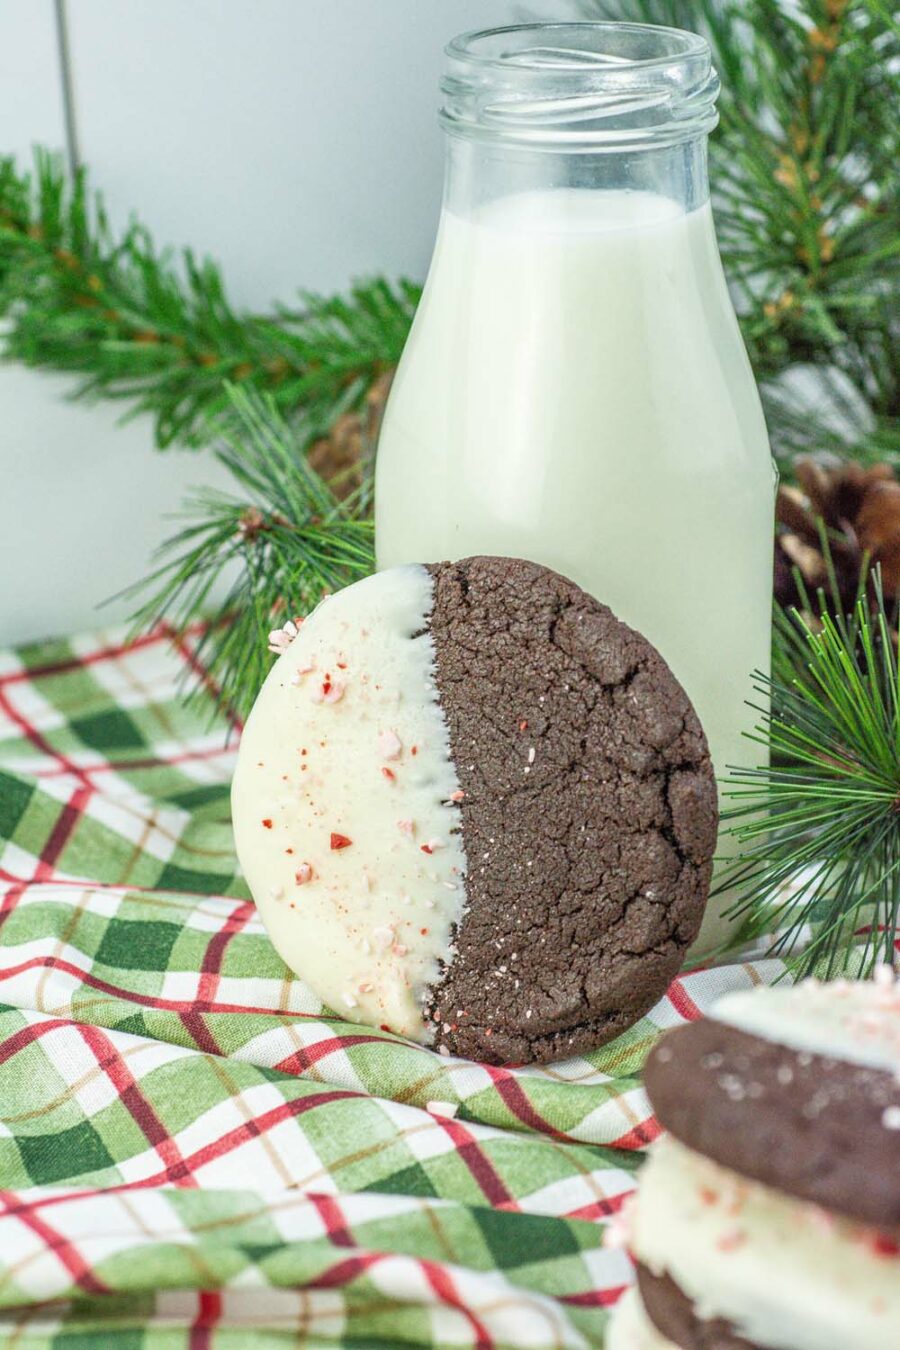 White Chocolate Dipped Chocolate Peppermint Cookie leaning against a small bottle of milk